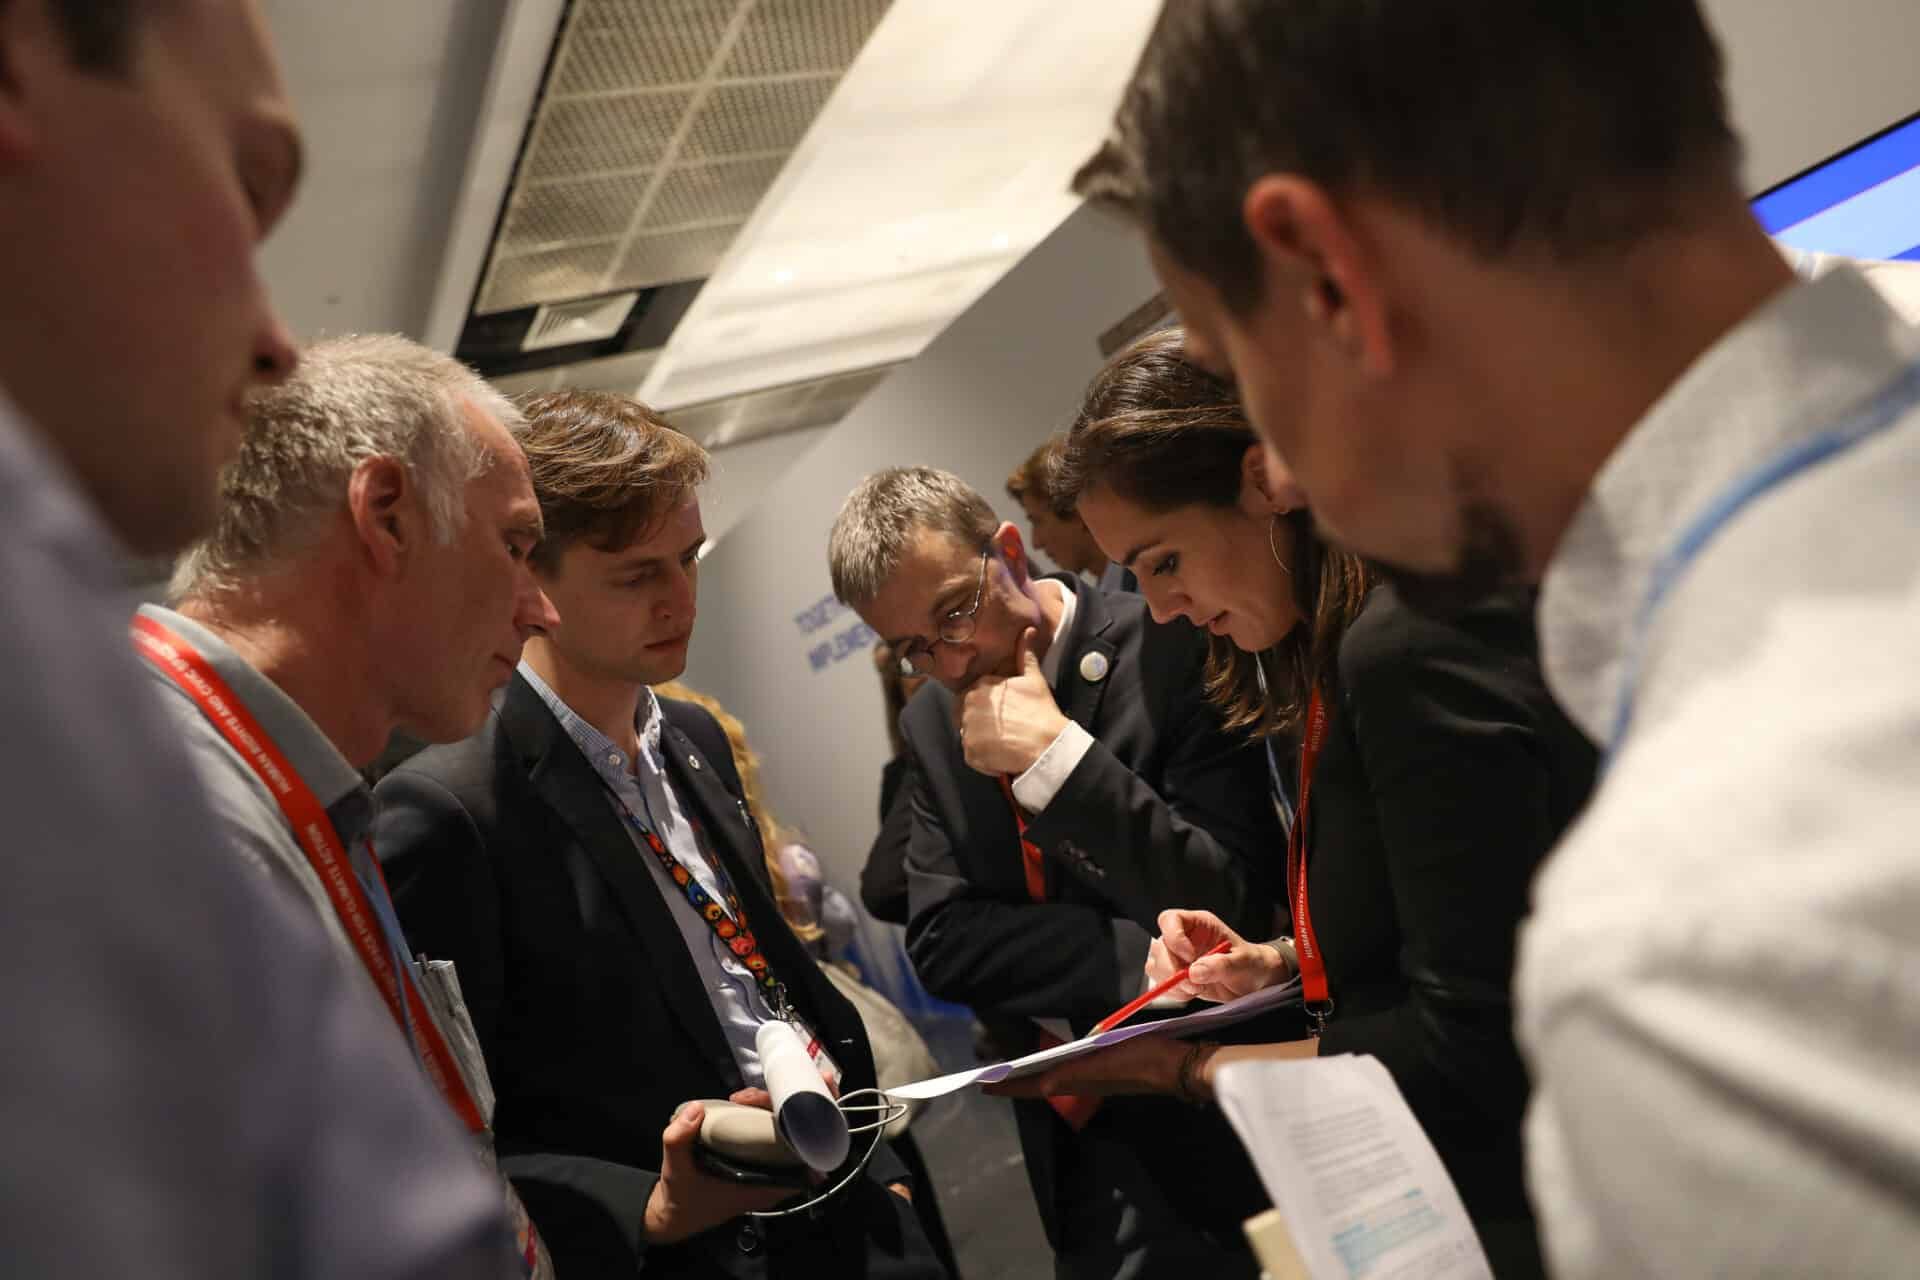 delegates in conversation over a clipboard